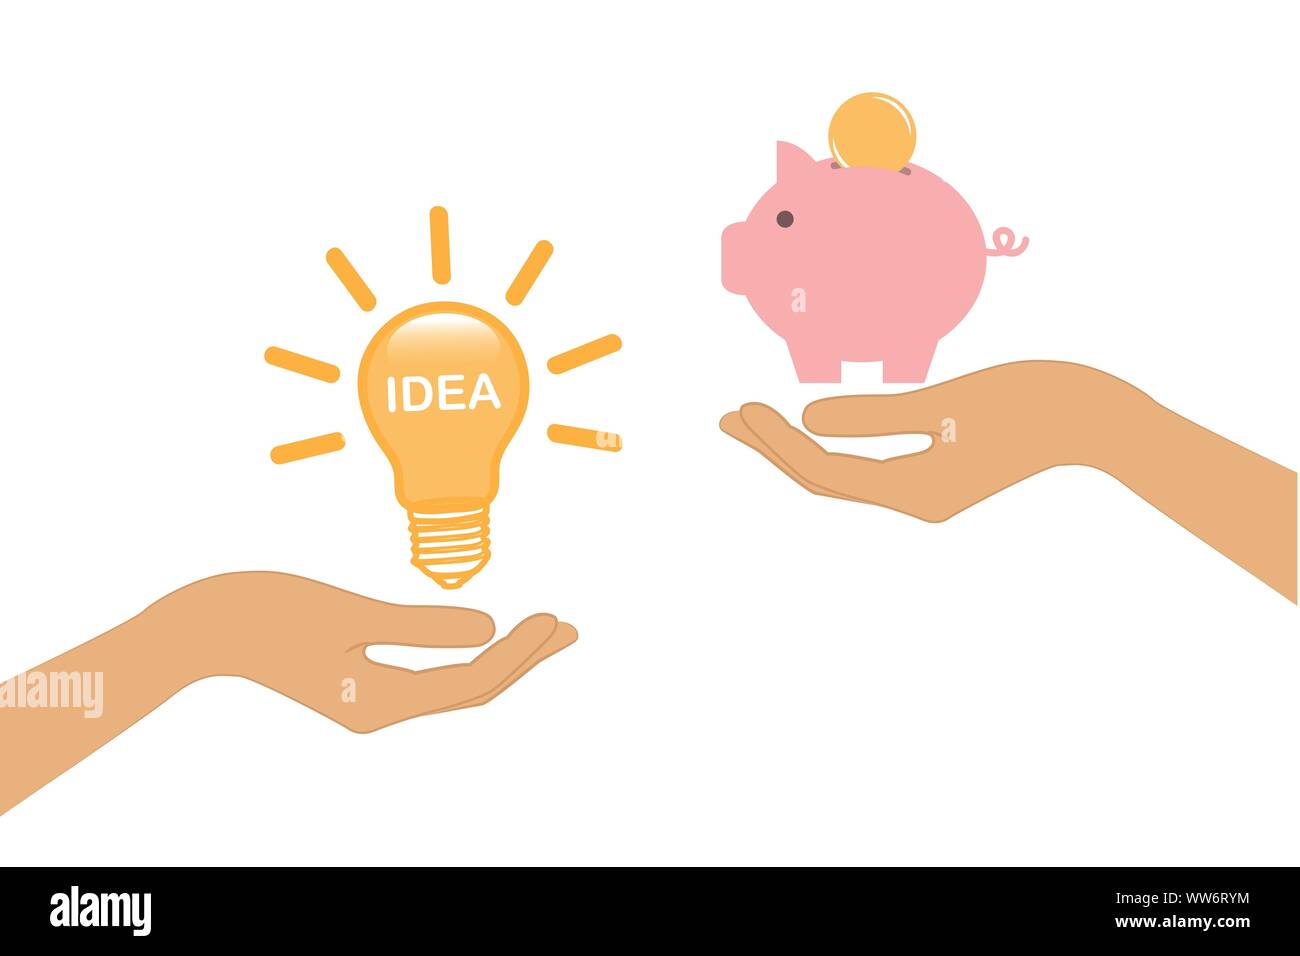 idea and money change concept with human hands vector illustration EPS10 Stock Vector